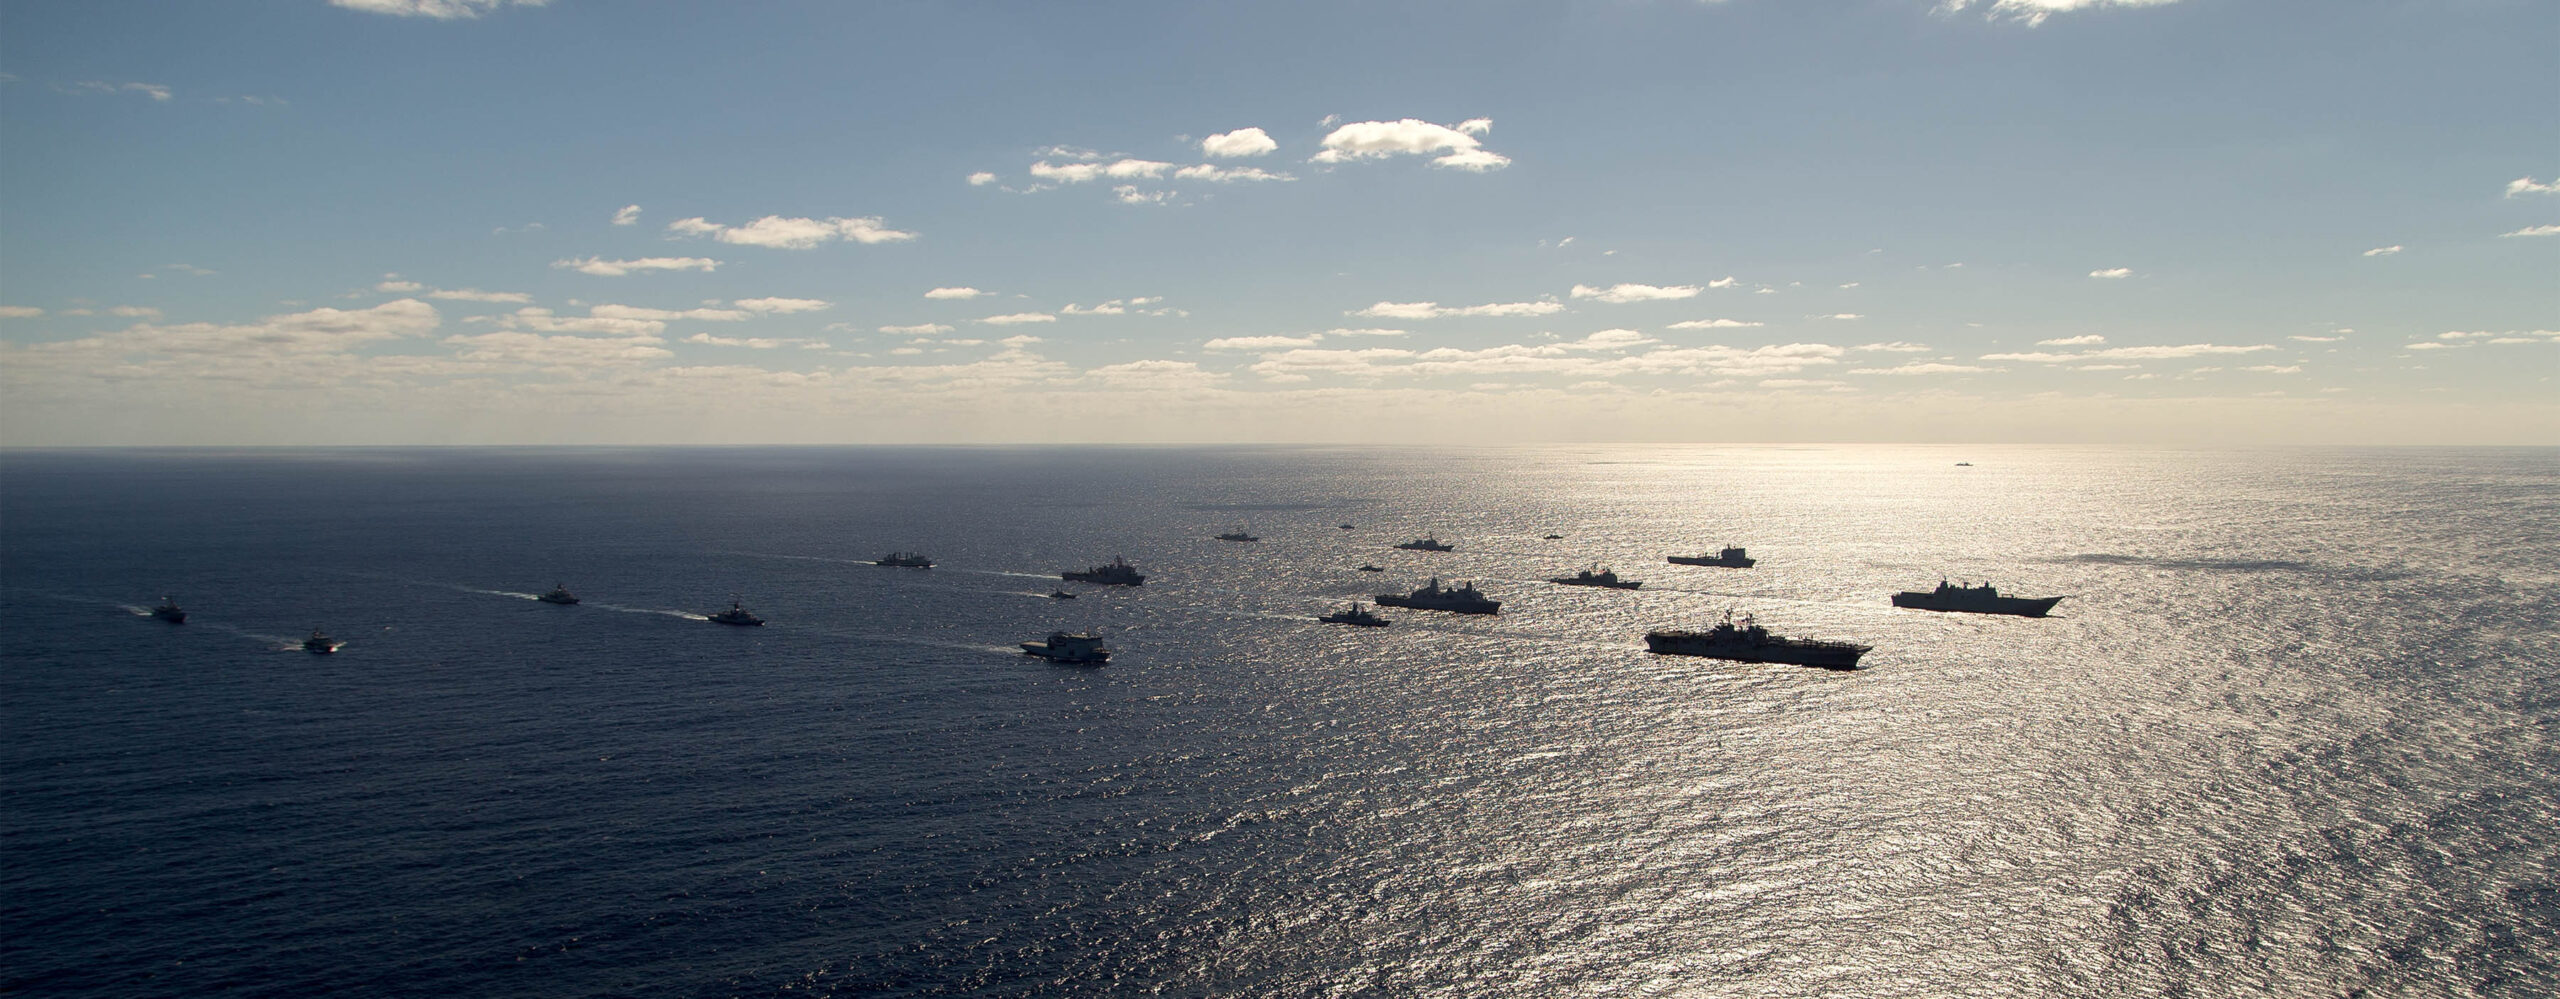 Navy Ships from Australia, United States of America and New Zealand come together in formation at the completion of Exercise Talisman Saber 17. *** Local Caption *** The Talisman Saber series of exercises is the principal Australian and United States Military Training activity focused on the planning and conduct of mid-intensity ‘high end’ war fighting. Exercise Talisman Saber is the largest combined, joint military exercise undertaken by the Australian Defence Force (ADF) and provides invaluable experience to ADF personnel to improve combat training, readiness and interoperability, exposing participants to a wide spectrum of military capabilities and training experiences. The biennial exercise was conducted for the seventh time in 2017, involving more than 30,000 US and Australian participants, operating in the maritime, land and air environments.